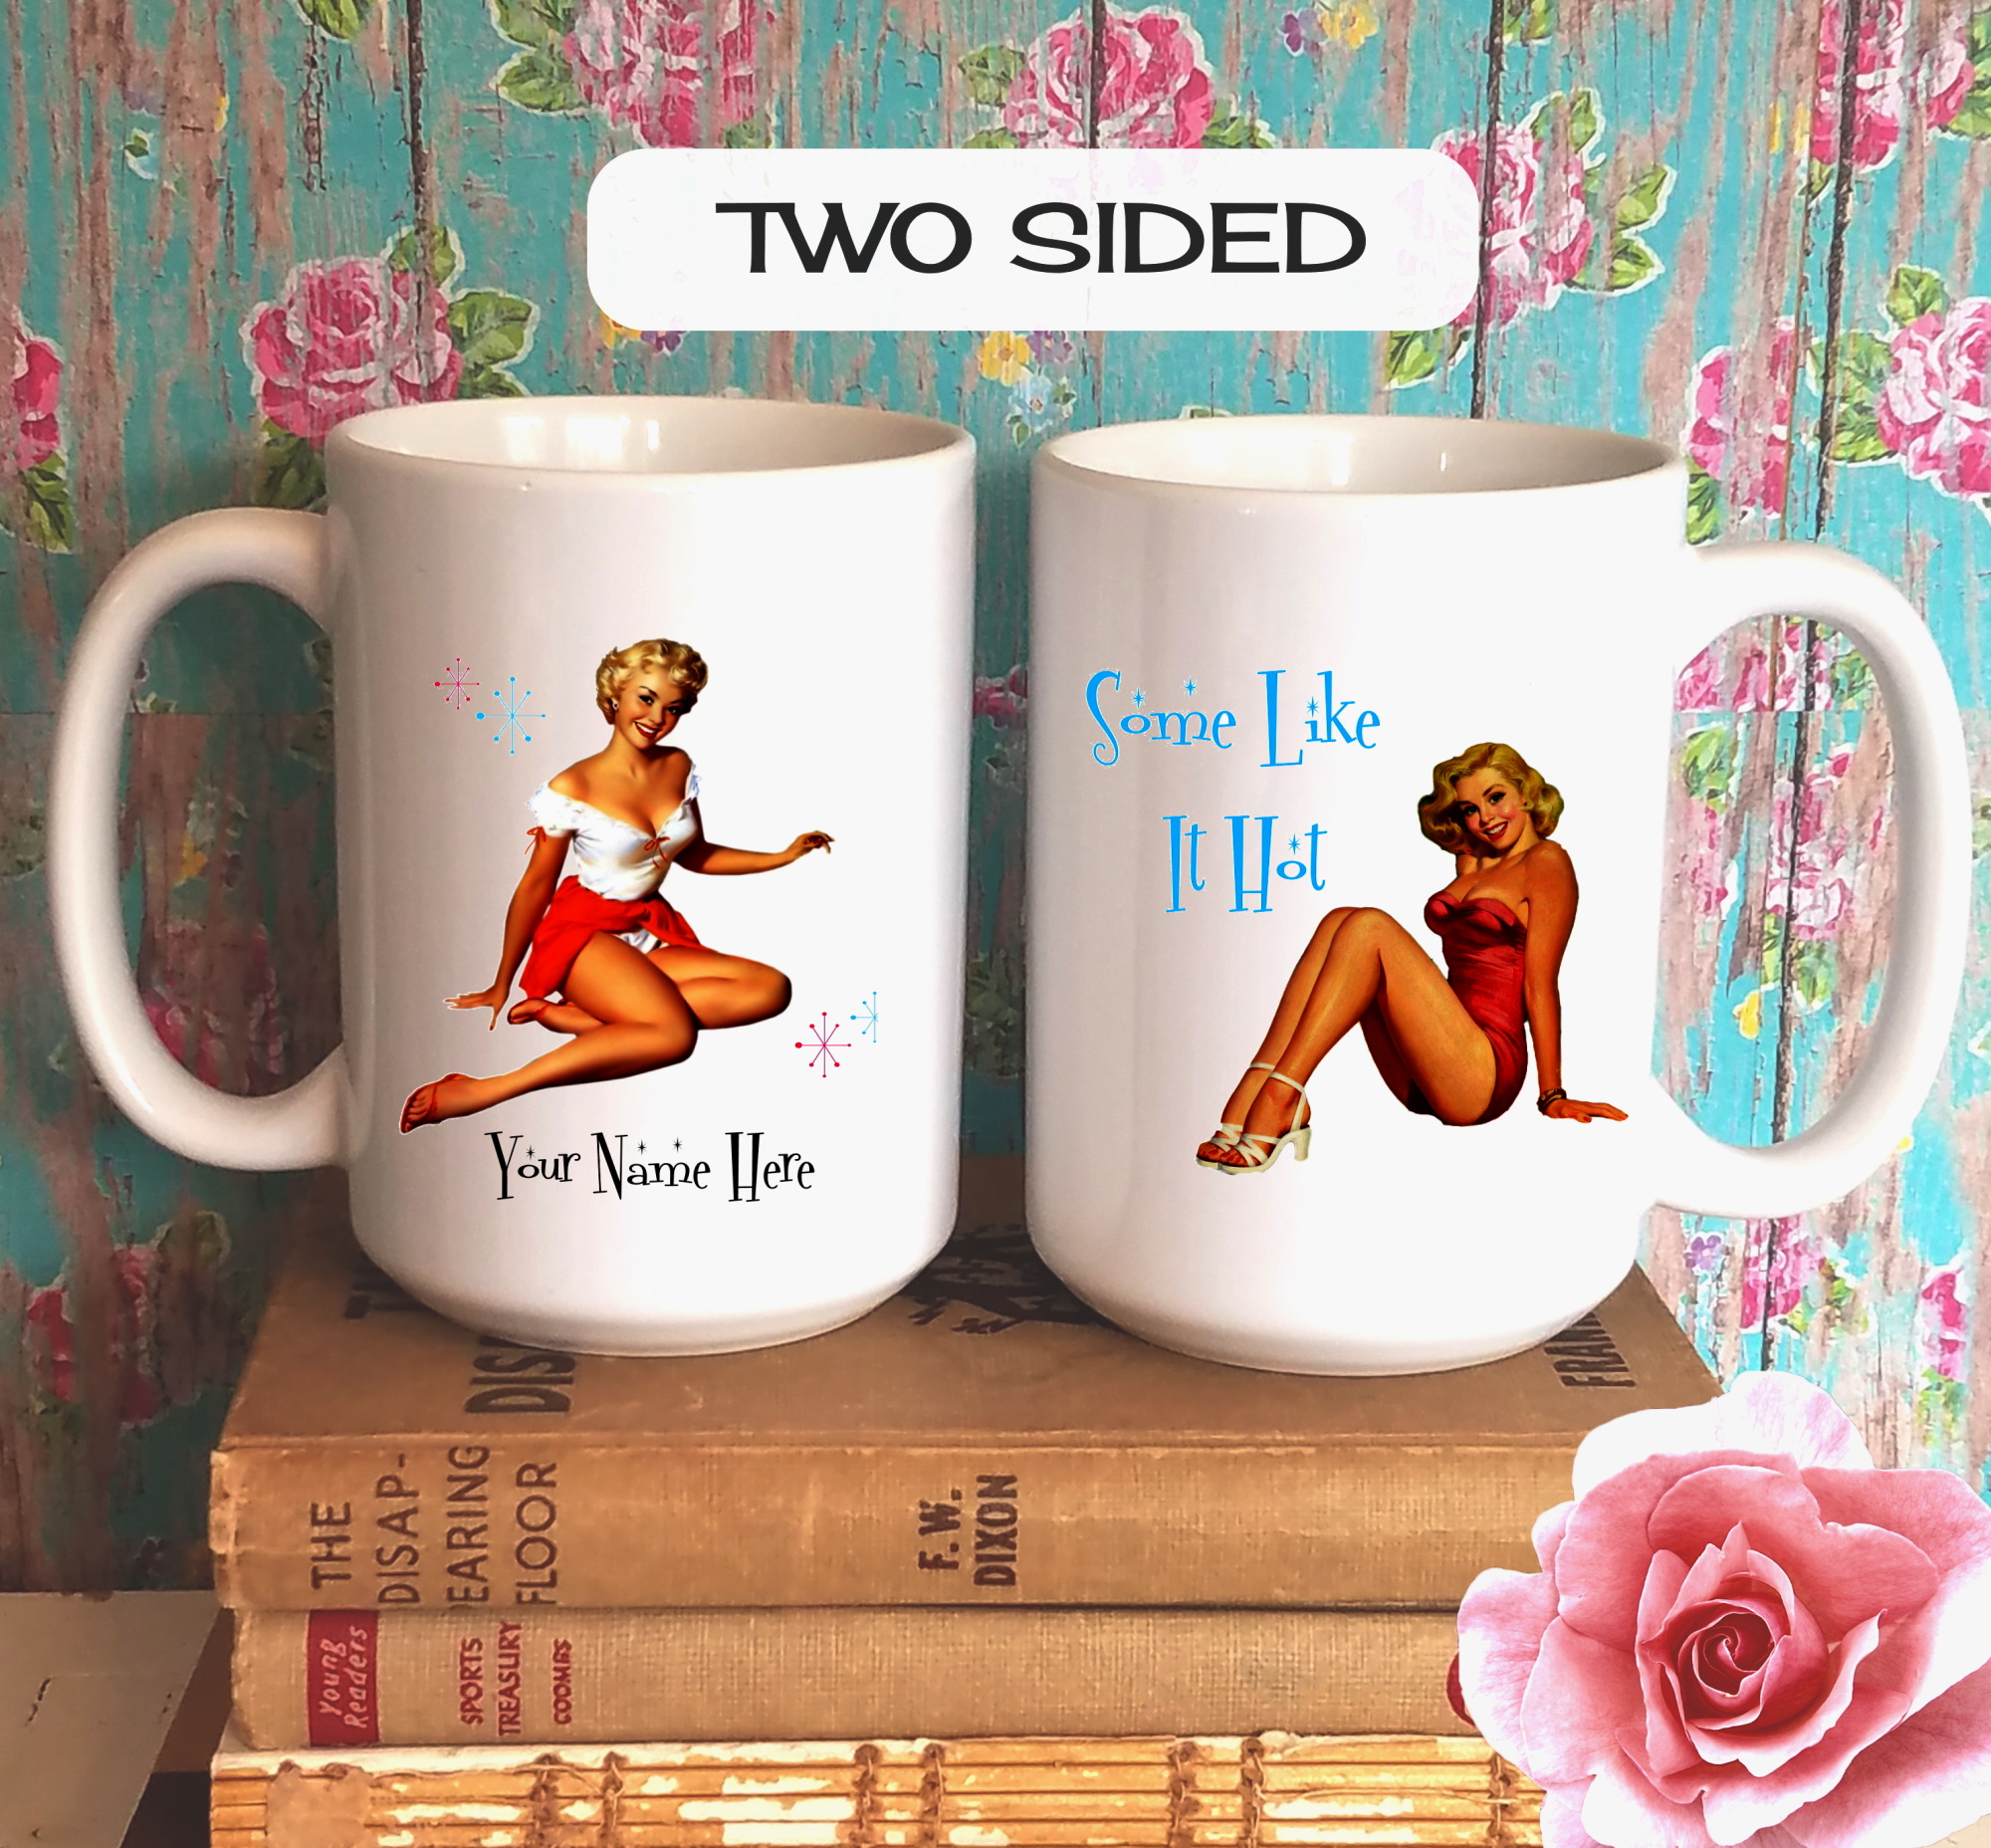 Hot girls coffee cups Personalized Retro Kitsch Sexy Pinup Girl Coffee Mug Some Like It Hot